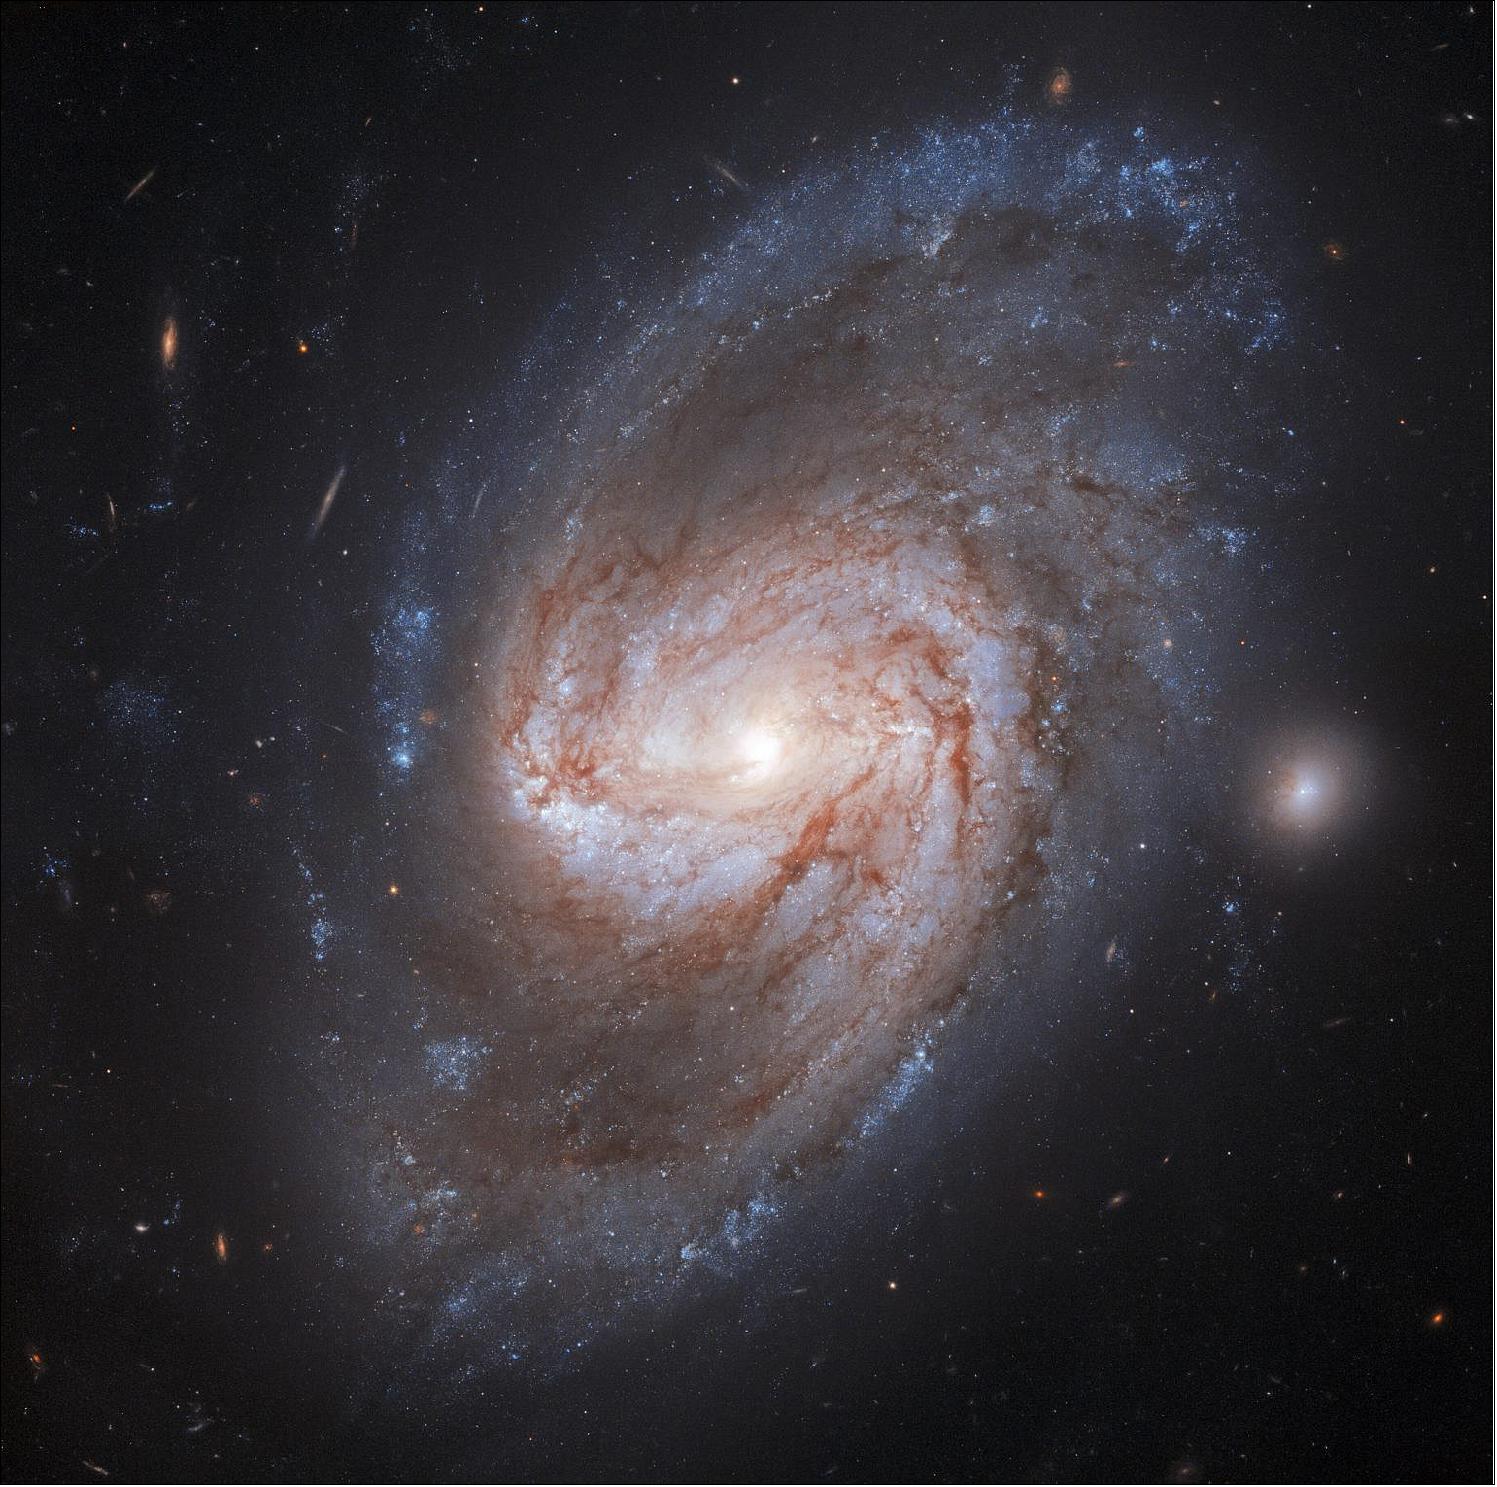 Figure 61: In the forests of the night lies a barred spiral galaxy called NGC 3583, imaged here by the NASA/ESA Hubble Space Telescope. This is a barred spiral galaxy with two arms that twist out into the Universe. This galaxy is located 98 million light-years away from the Milky Way. Two supernovae exploded in this galaxy, one in 1975 and another, more recently, in 2015 (image credit: ESA/Hubble & NASA, A. Riess et al.; CC BY 4.0)